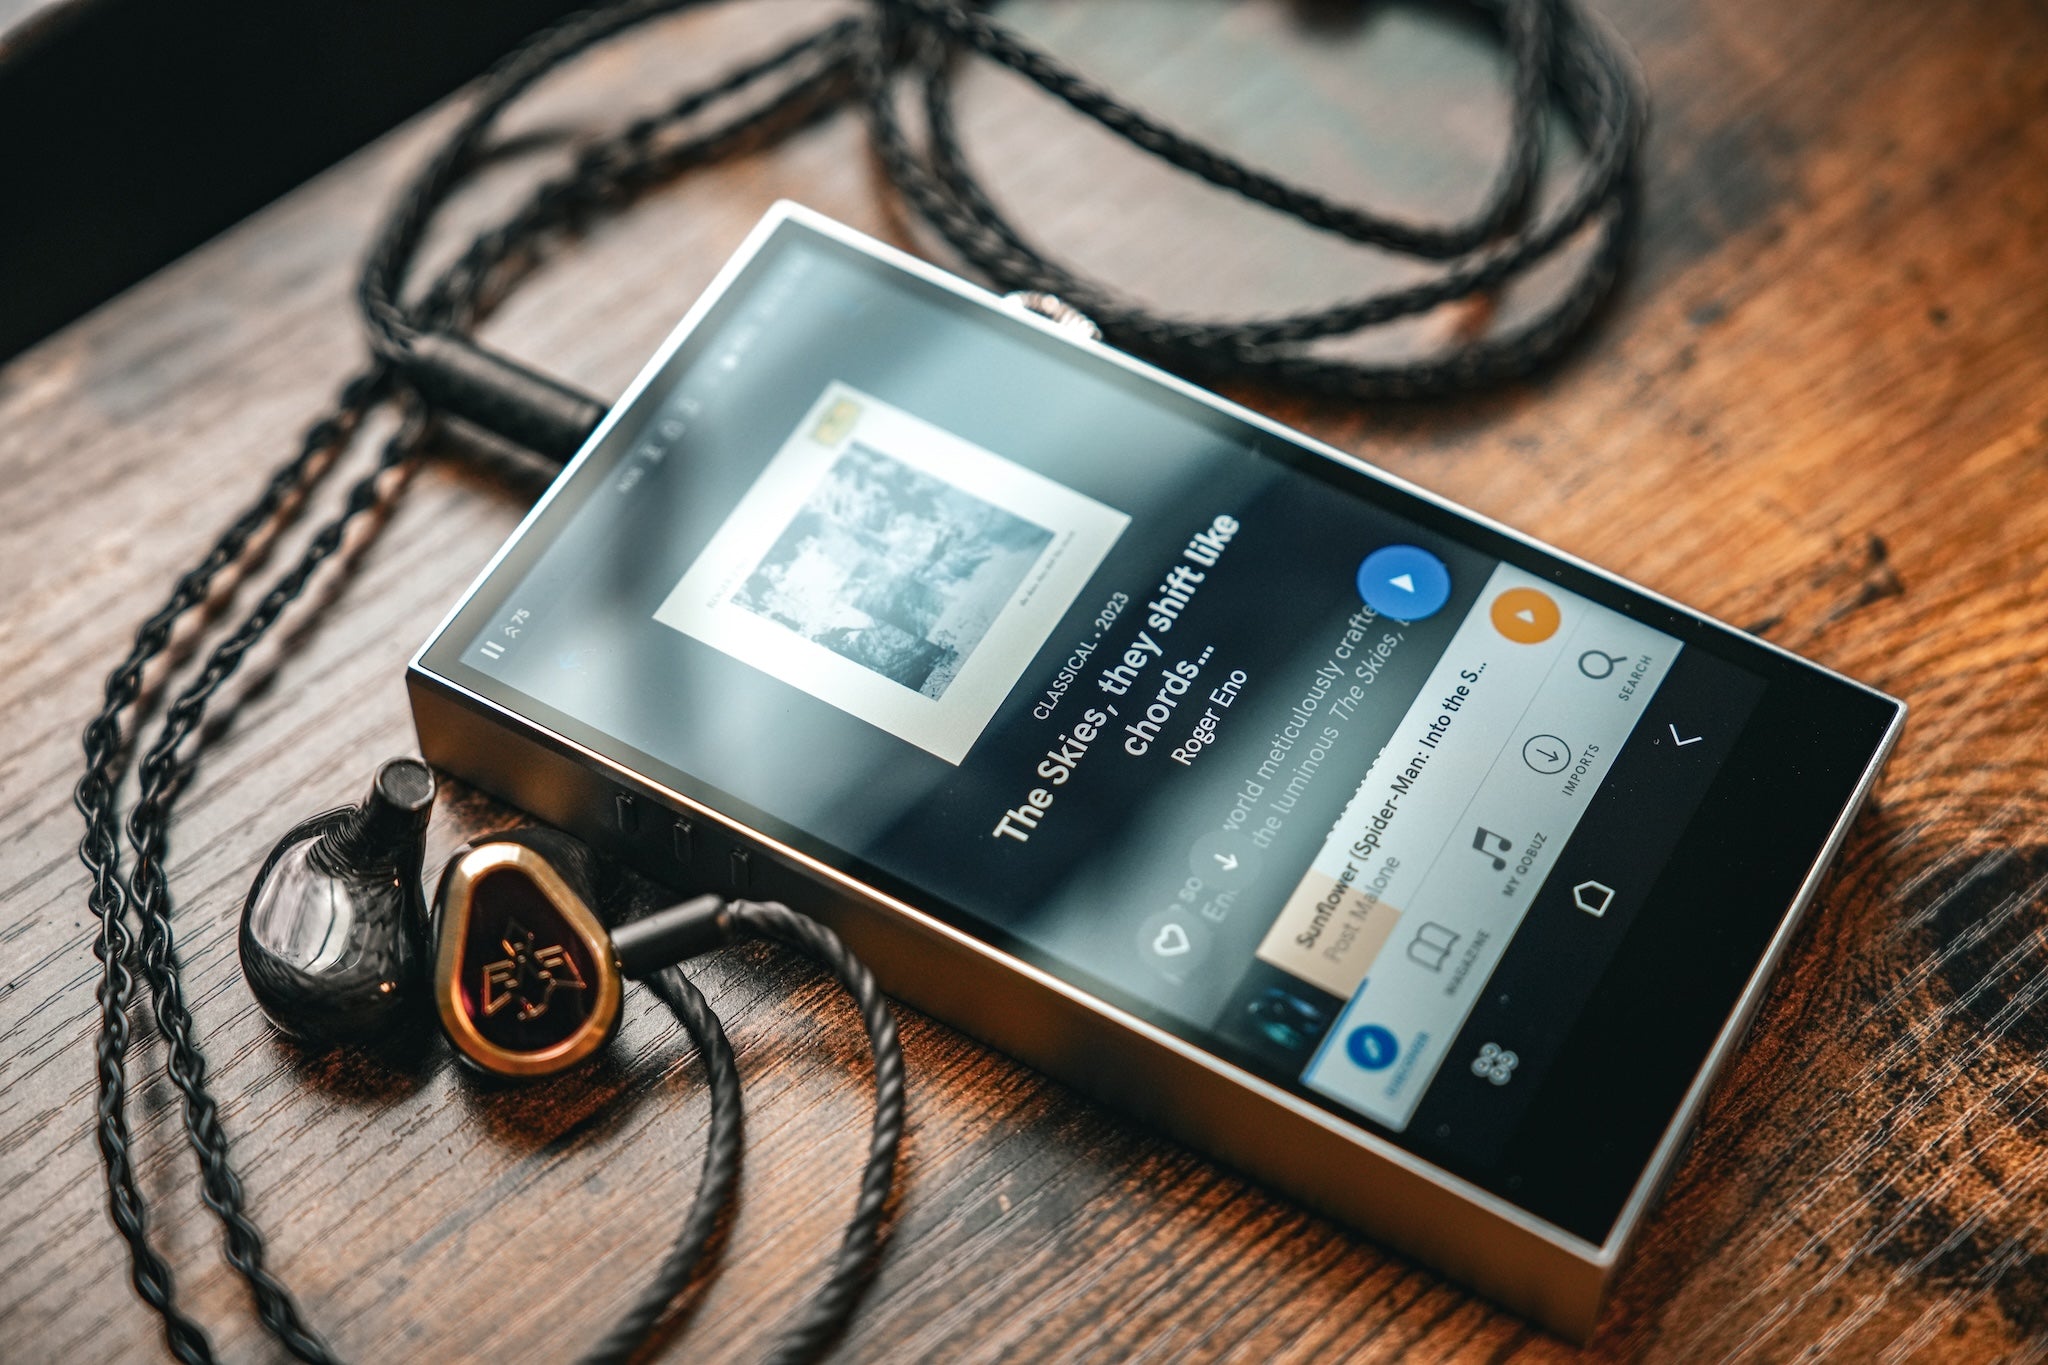 Astell&Kern SE300 front three quarter with connected Vision Ears earphones on wood table